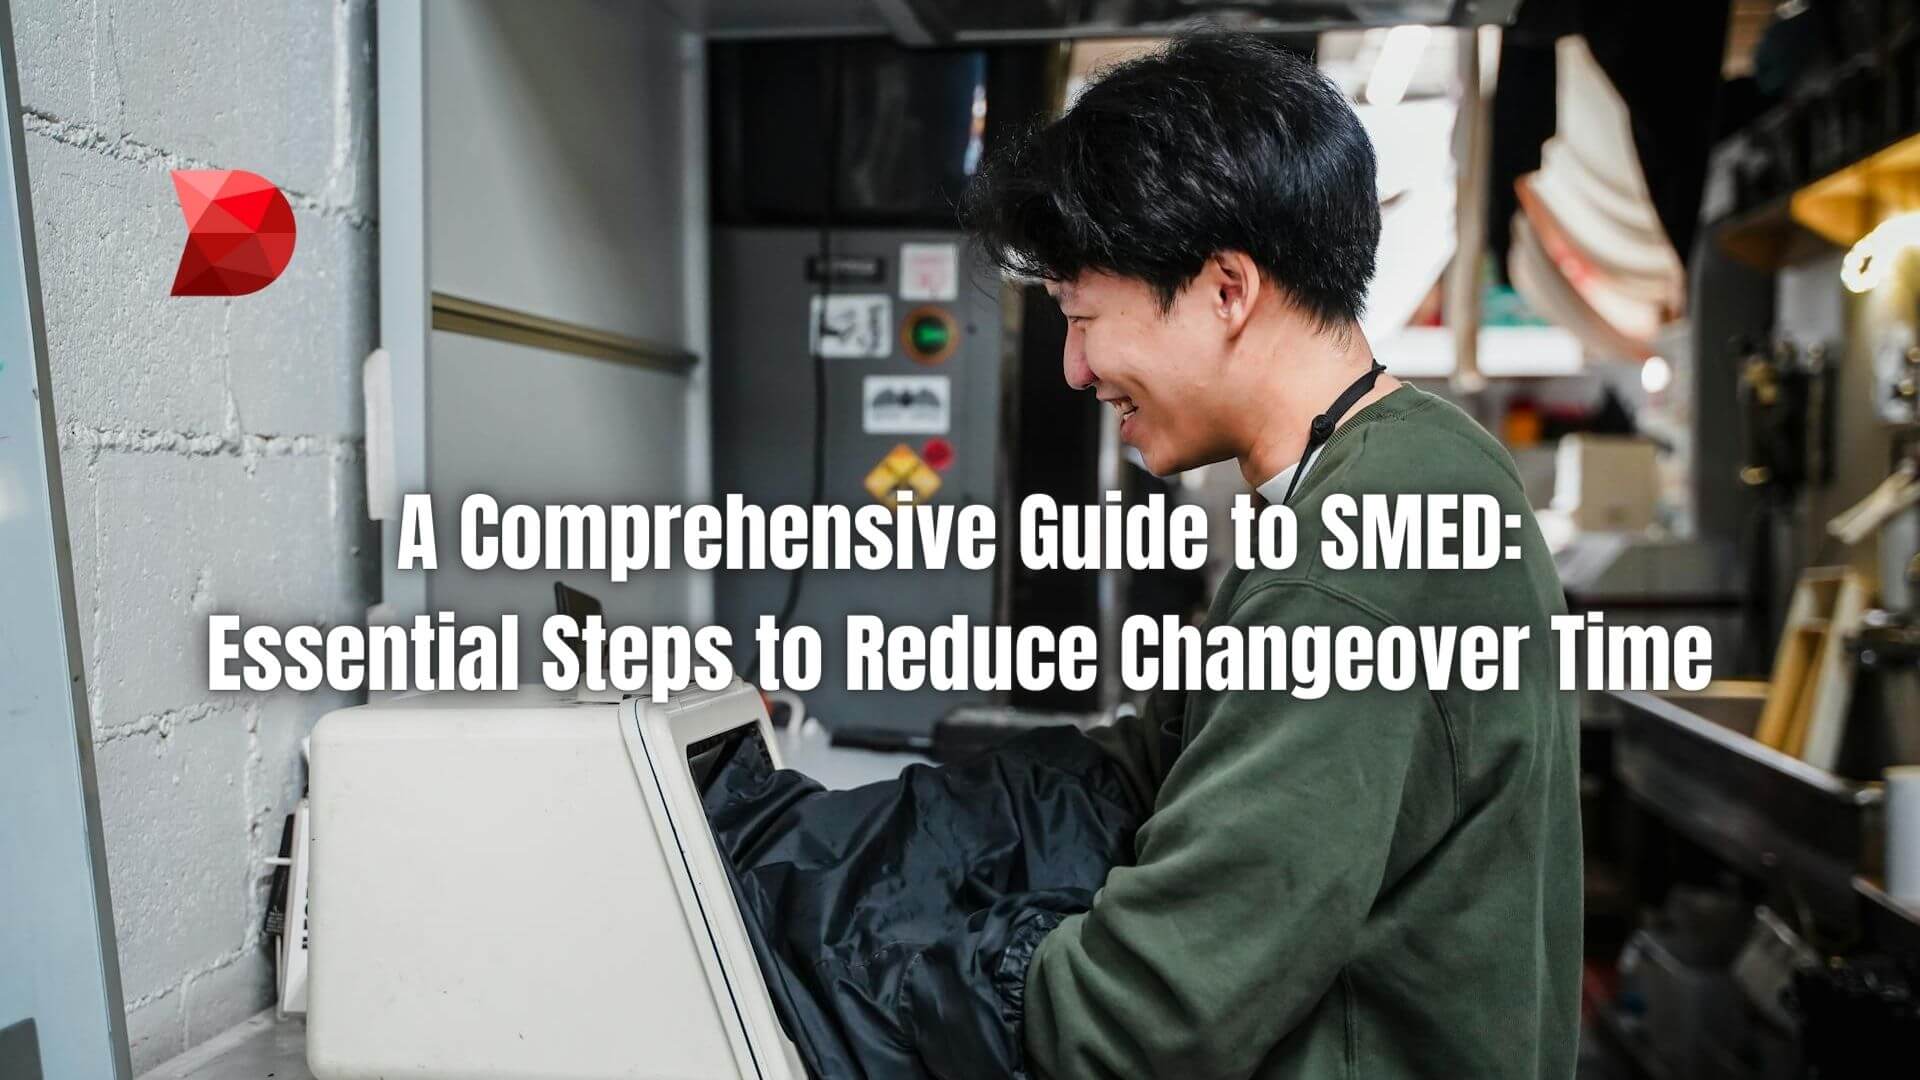 Reduce changeover time efficiently! Discover the key steps to streamline your operations with our comprehensive guide to SMED techniques.